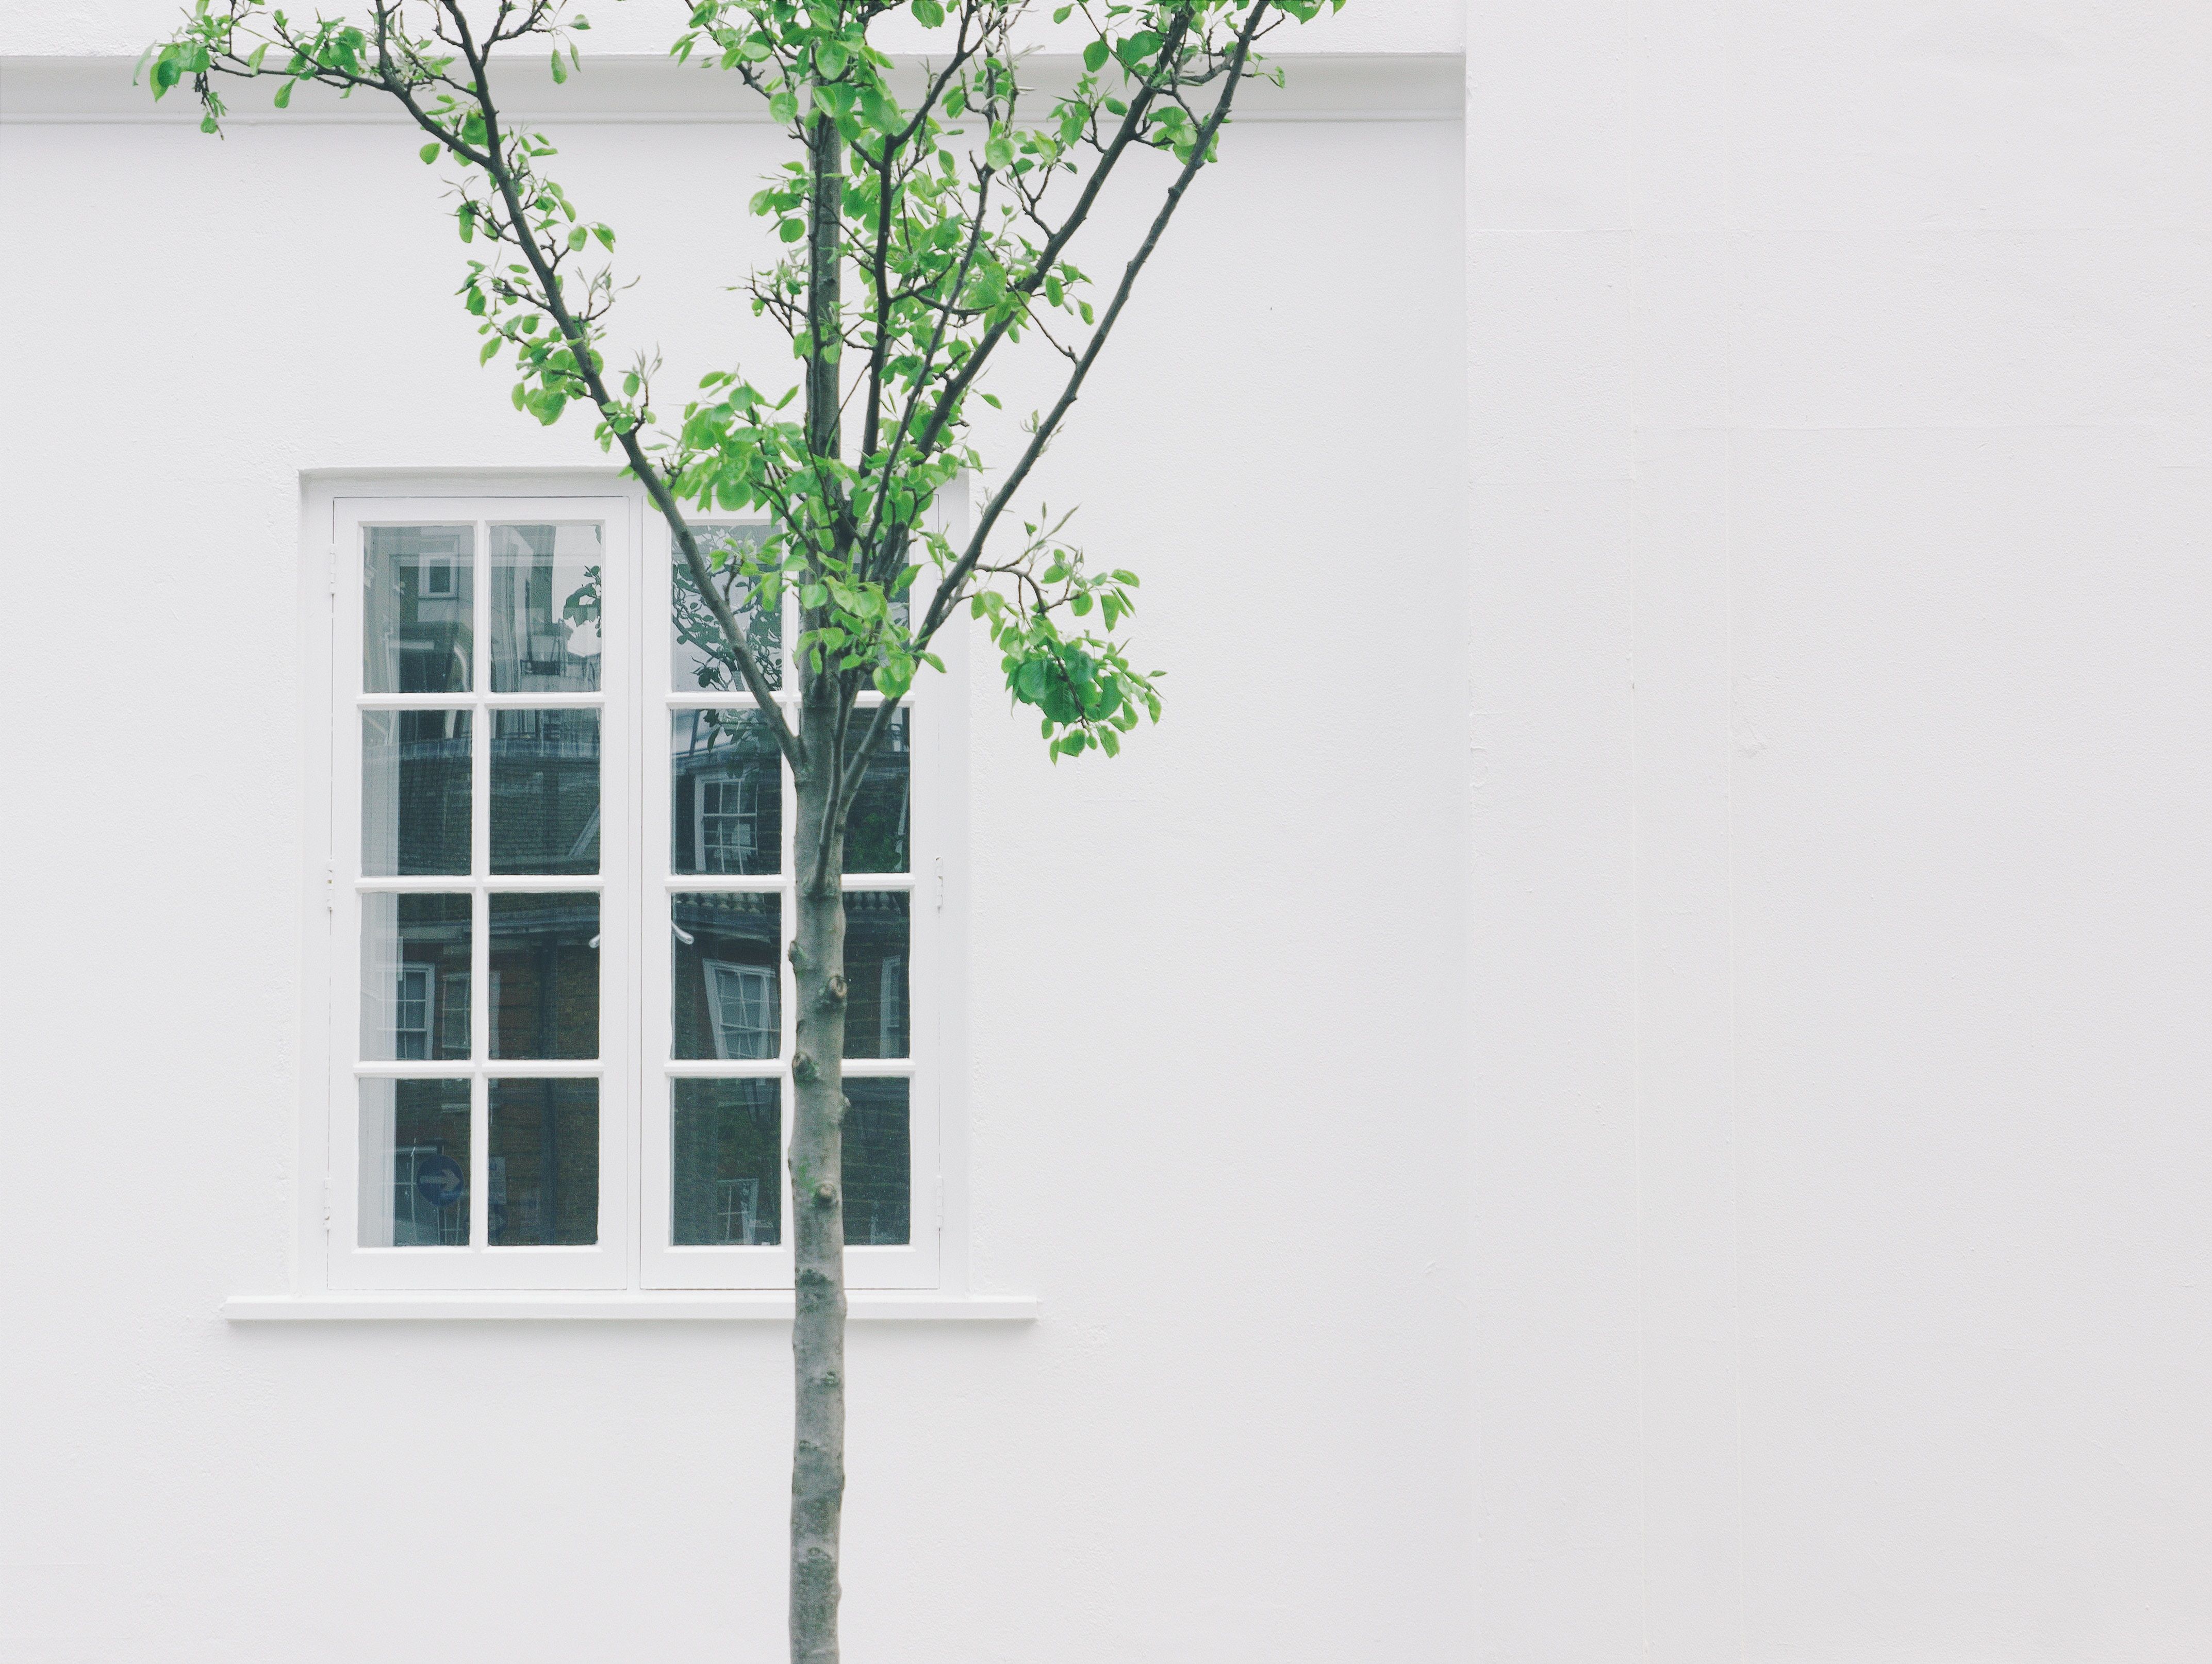 4290x3228 tree, wallpaper, aesthetic, minimalist, cozy, white, cityscape, city, minimal, summer, house, wall, cosy, negative space, love, beach, architecture, street, window, Free picture, simplicity Gallery HD Wallpaper